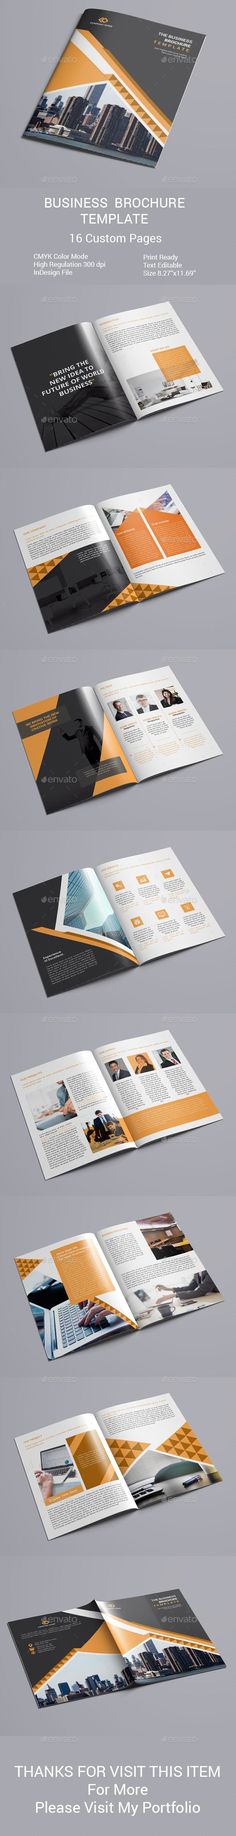 Business Brochure #DesignSets #graphicdesign #PrintTemplate #template #DesignResource #GraphicResources #GraphicRiver #collections #DesignCollection #PrintDesign #BrochureTemplates #sets #BrochureTempate #design #brochure #graphics Promotion, Corporate Brochure, Business Brochure, Company Brochure, Marketing Flyers